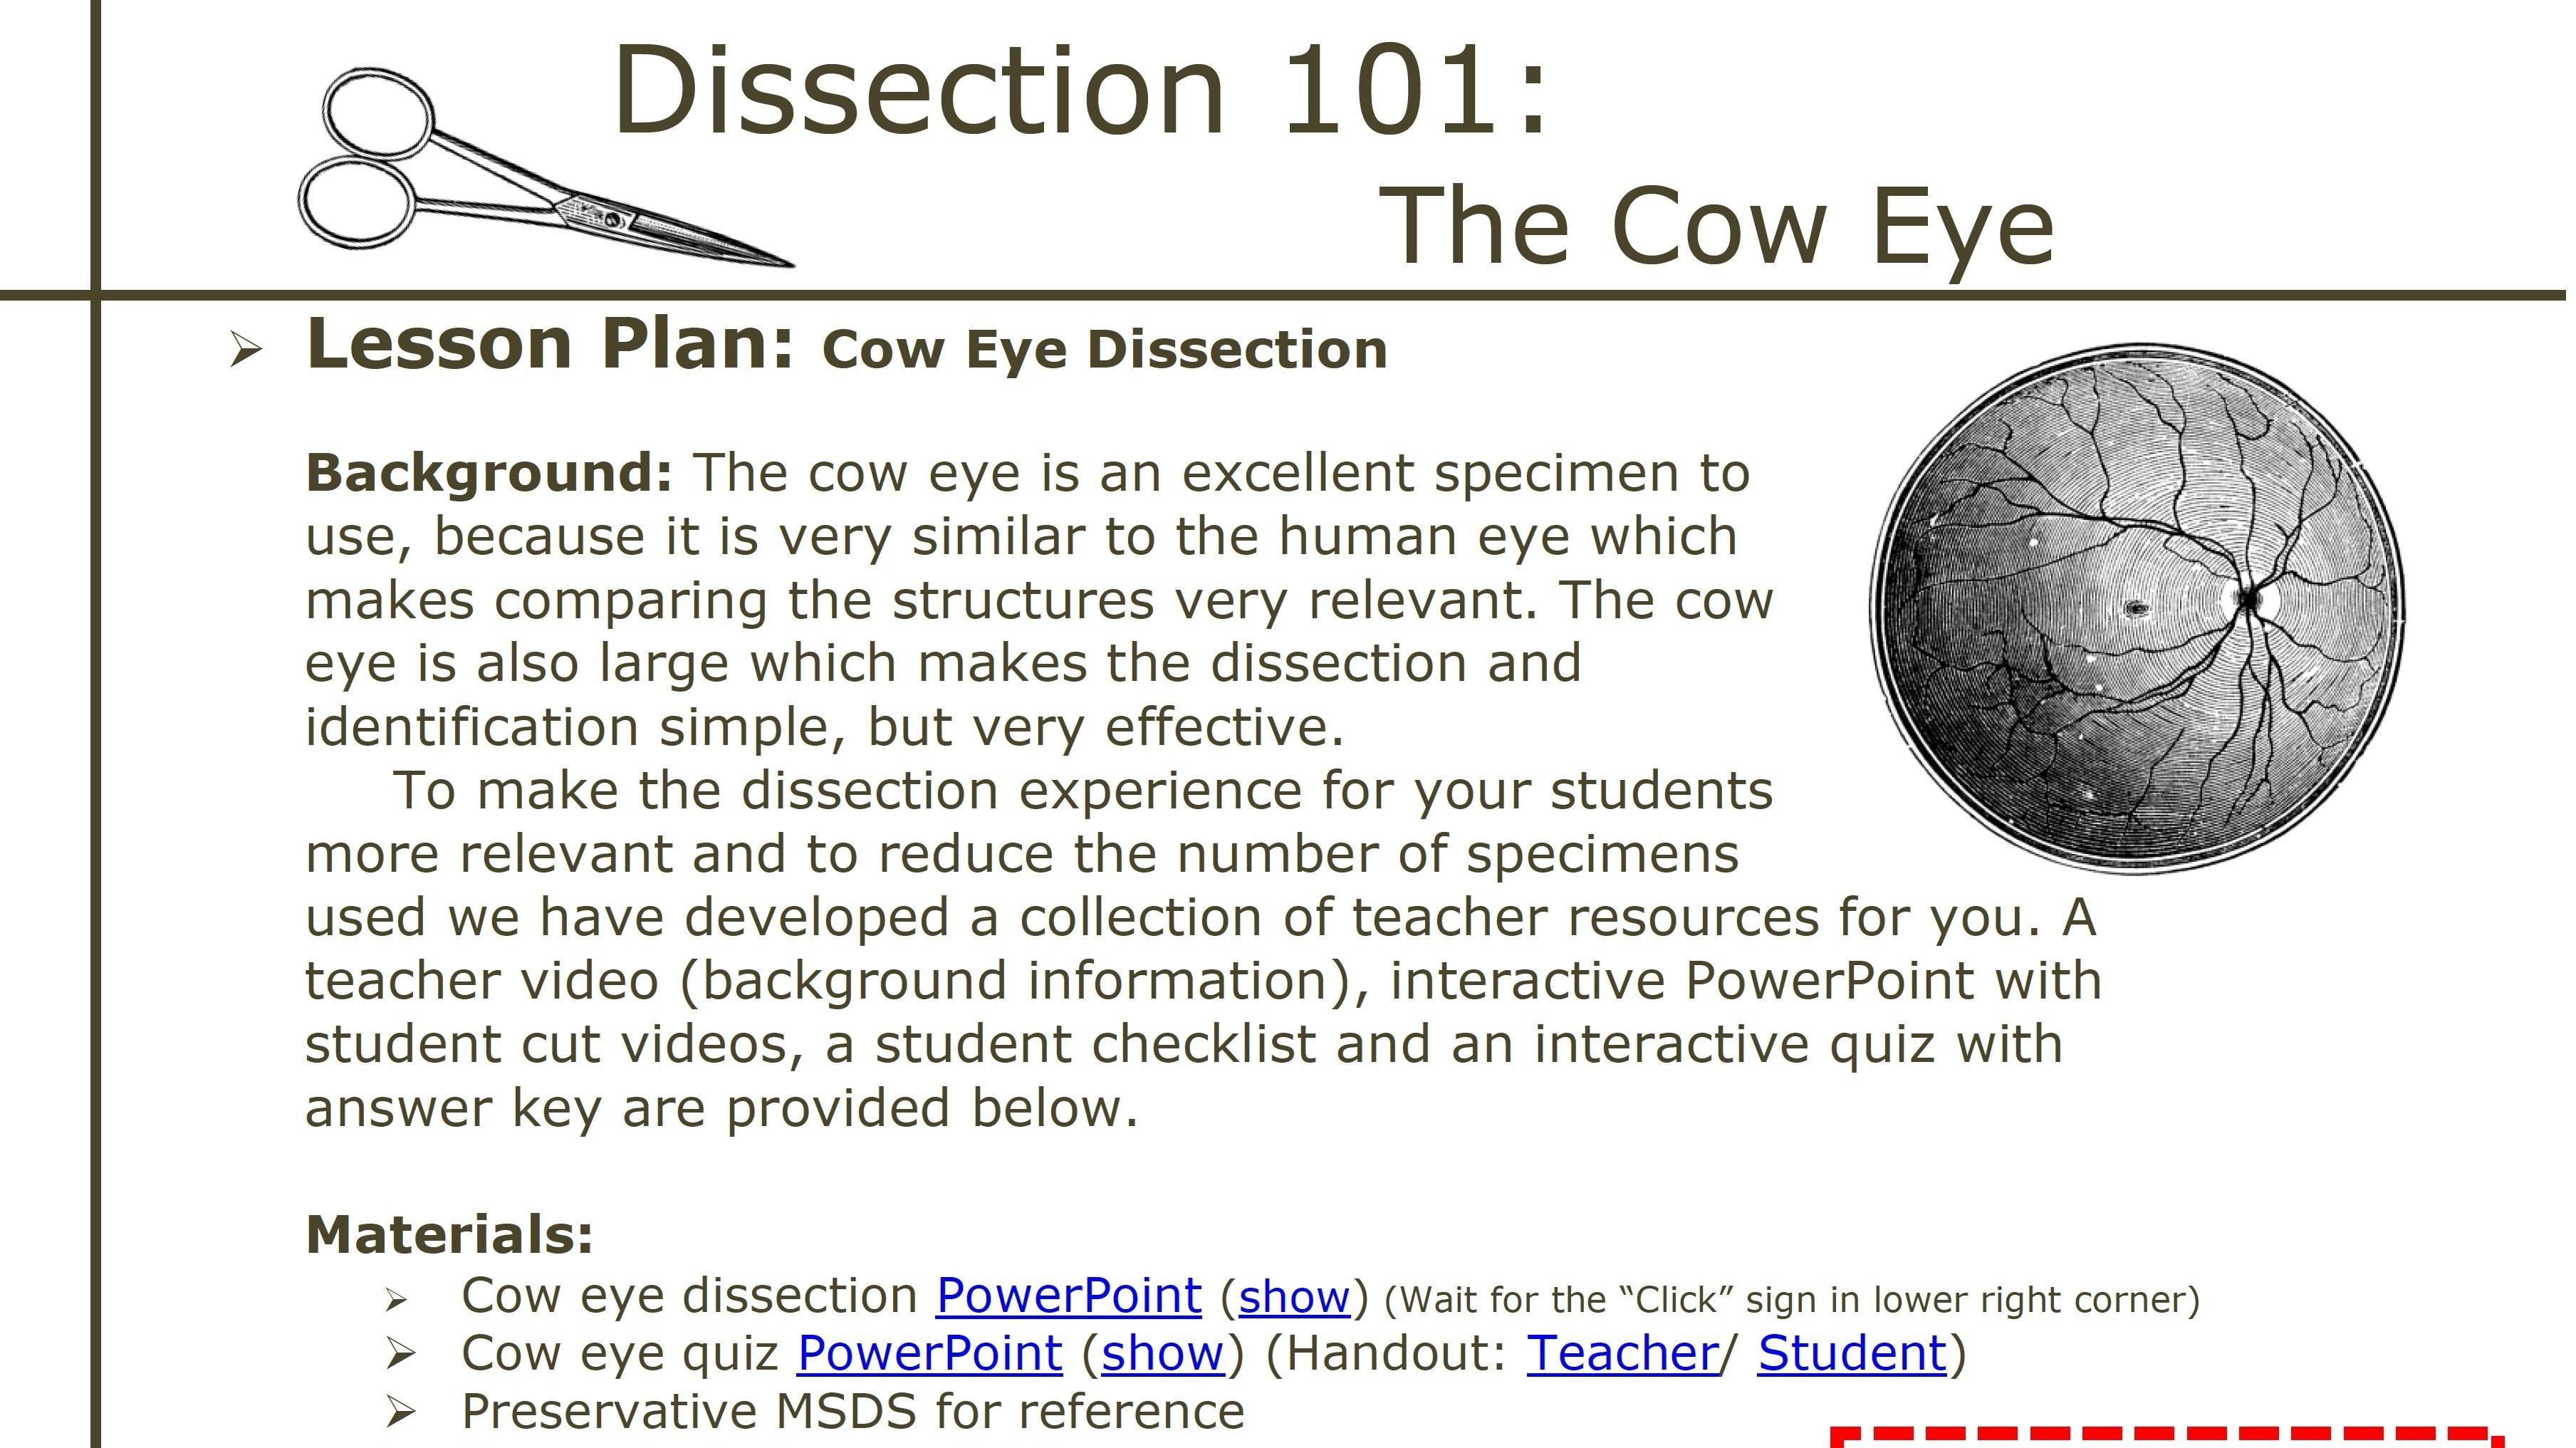 Dissection 101 Cow Eye Dissection Lesson Plan PBS LearningMedia